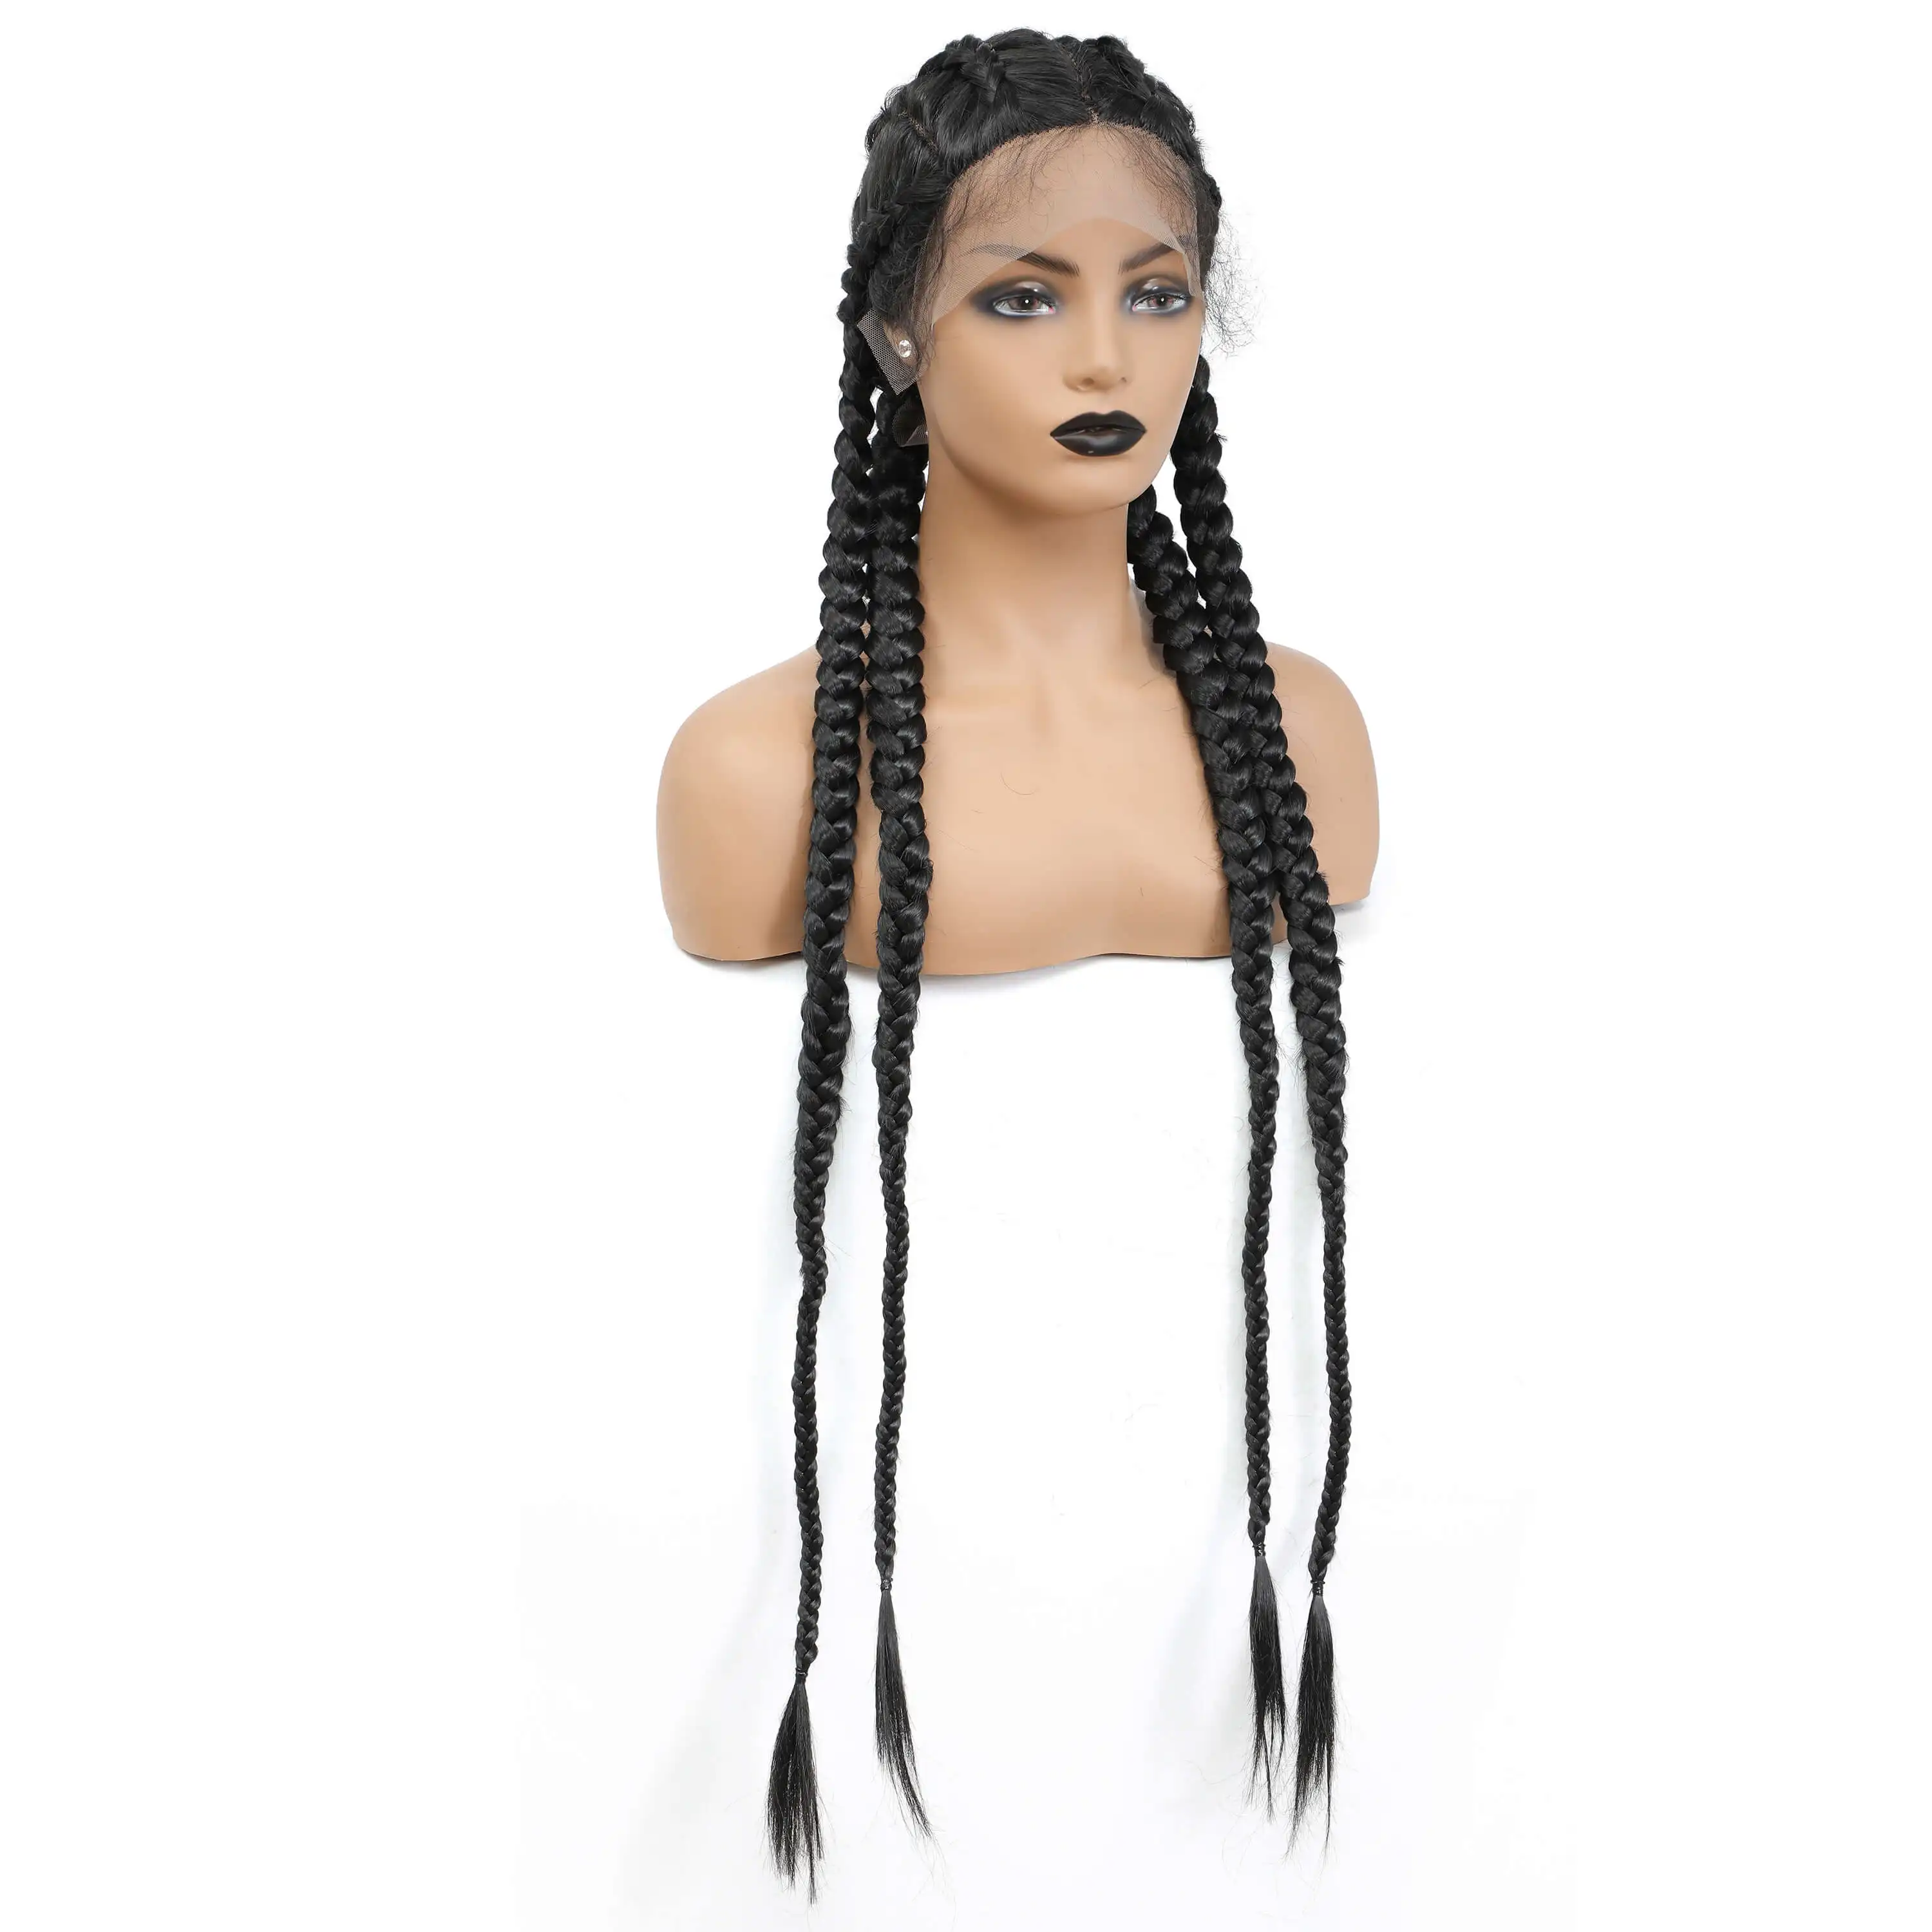 YunRong Synthetic Lace Front Braiding Wig T-Part Long Straight Ombre Wigs Black 30Inches For Black Women